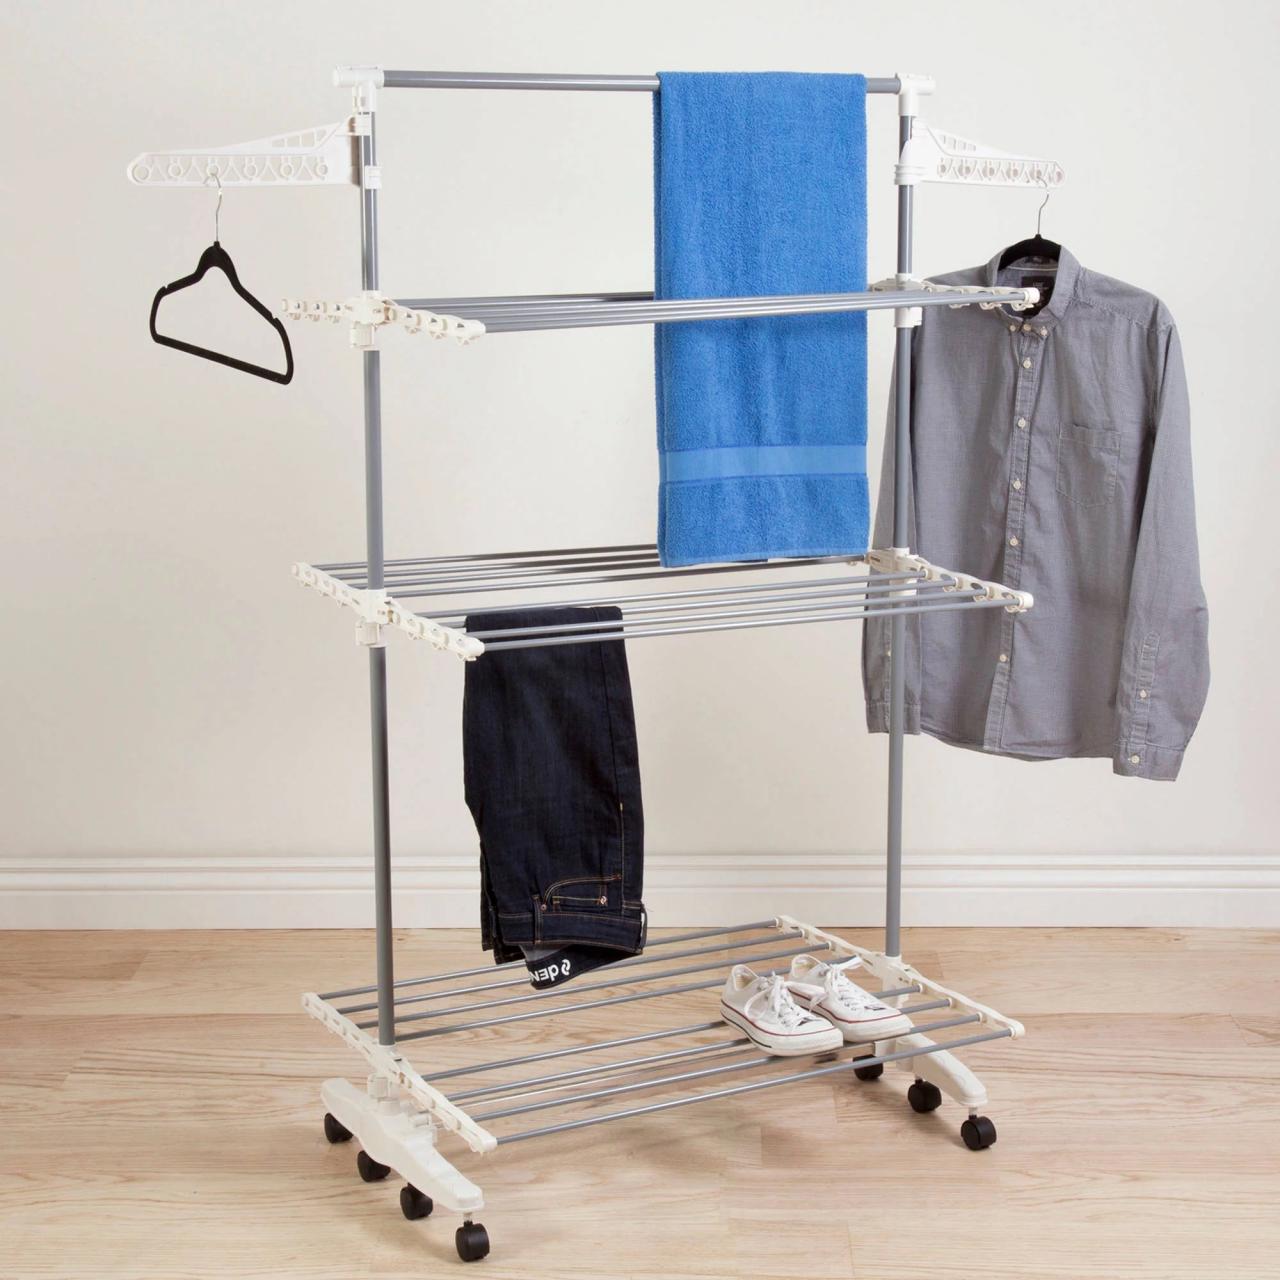 Heavy Duty 3 Tier Laundry Rack Stainless Steel Clothing Shelf by